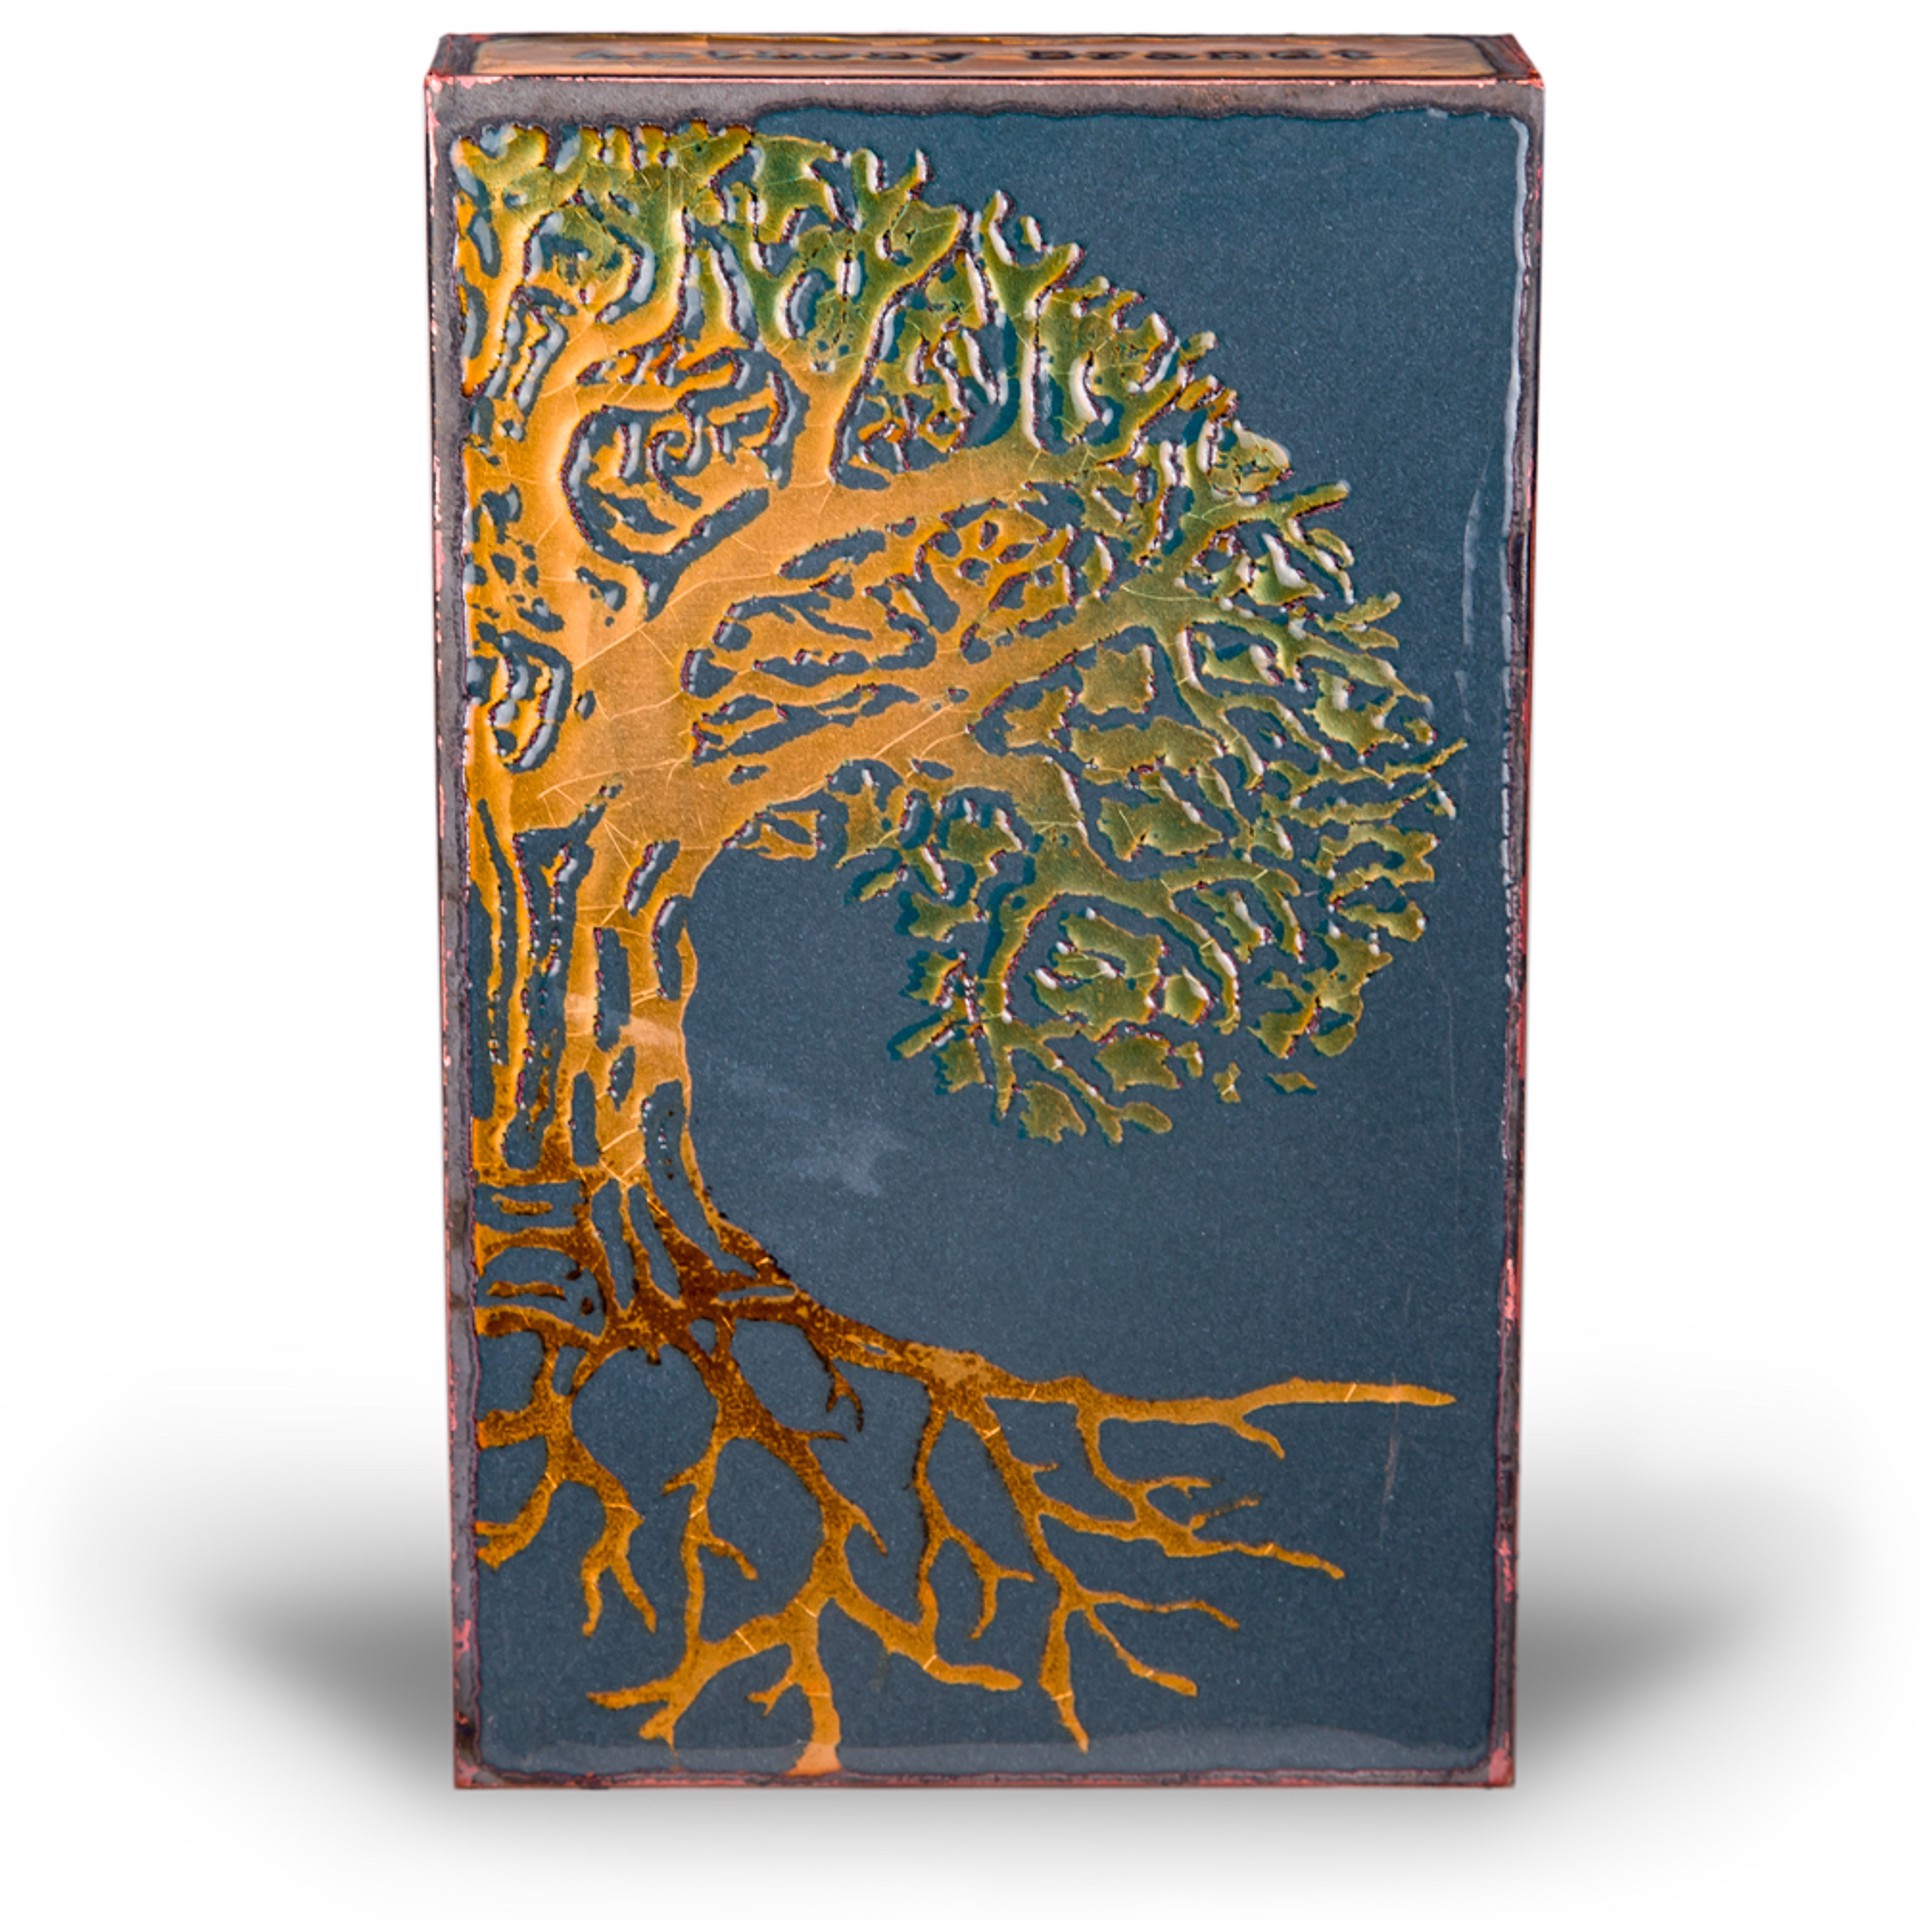 A Houston Llew Glass Fired To Copper Spiritile #223 Featuring A Tree And A Quote By Anthony Brandt, Available At Gallery Wild